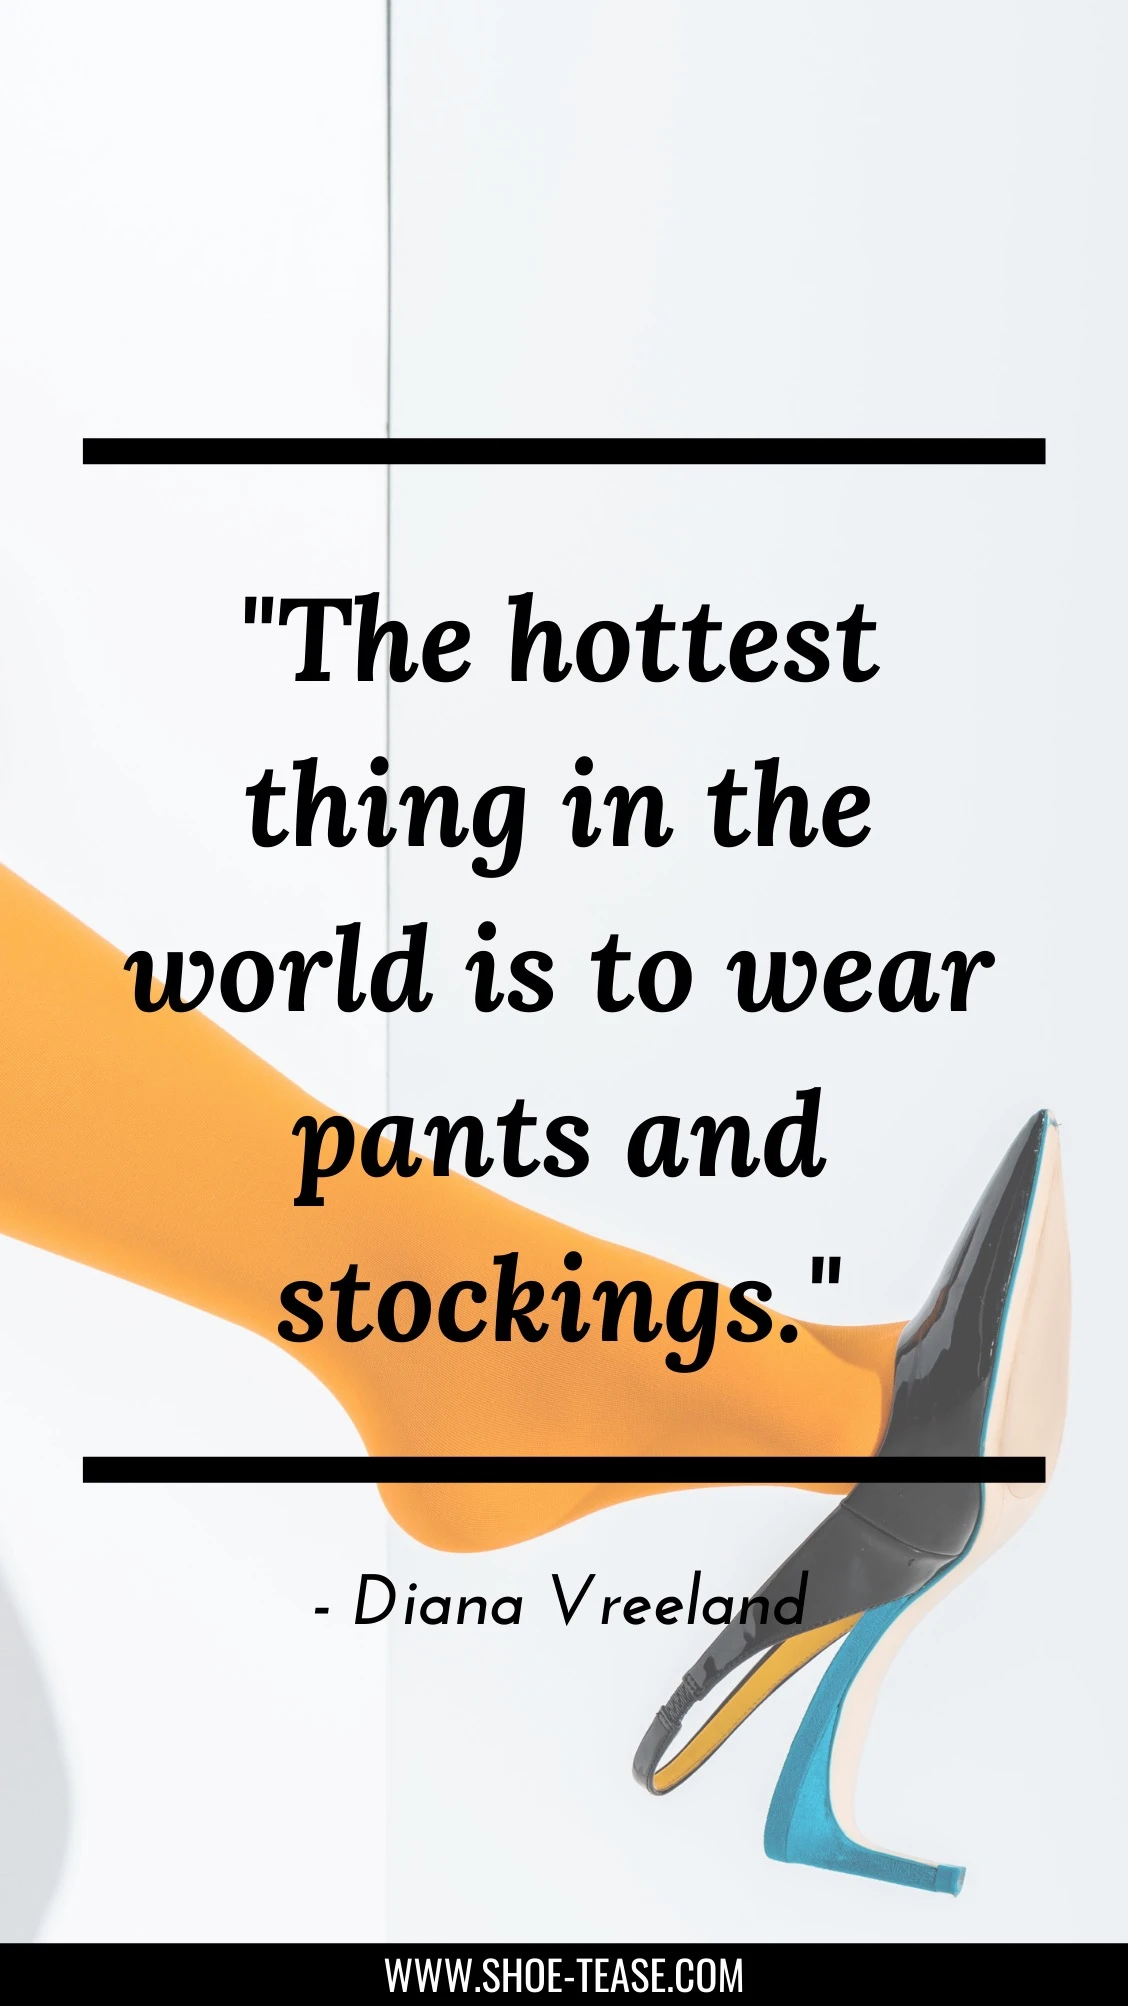 Pantyhose quote reading the hottest thing in teh word is to wear pants and stockings over cropped view of woman's foot wearing orange stocking and slingback black and turquoise pump dangling off foot.